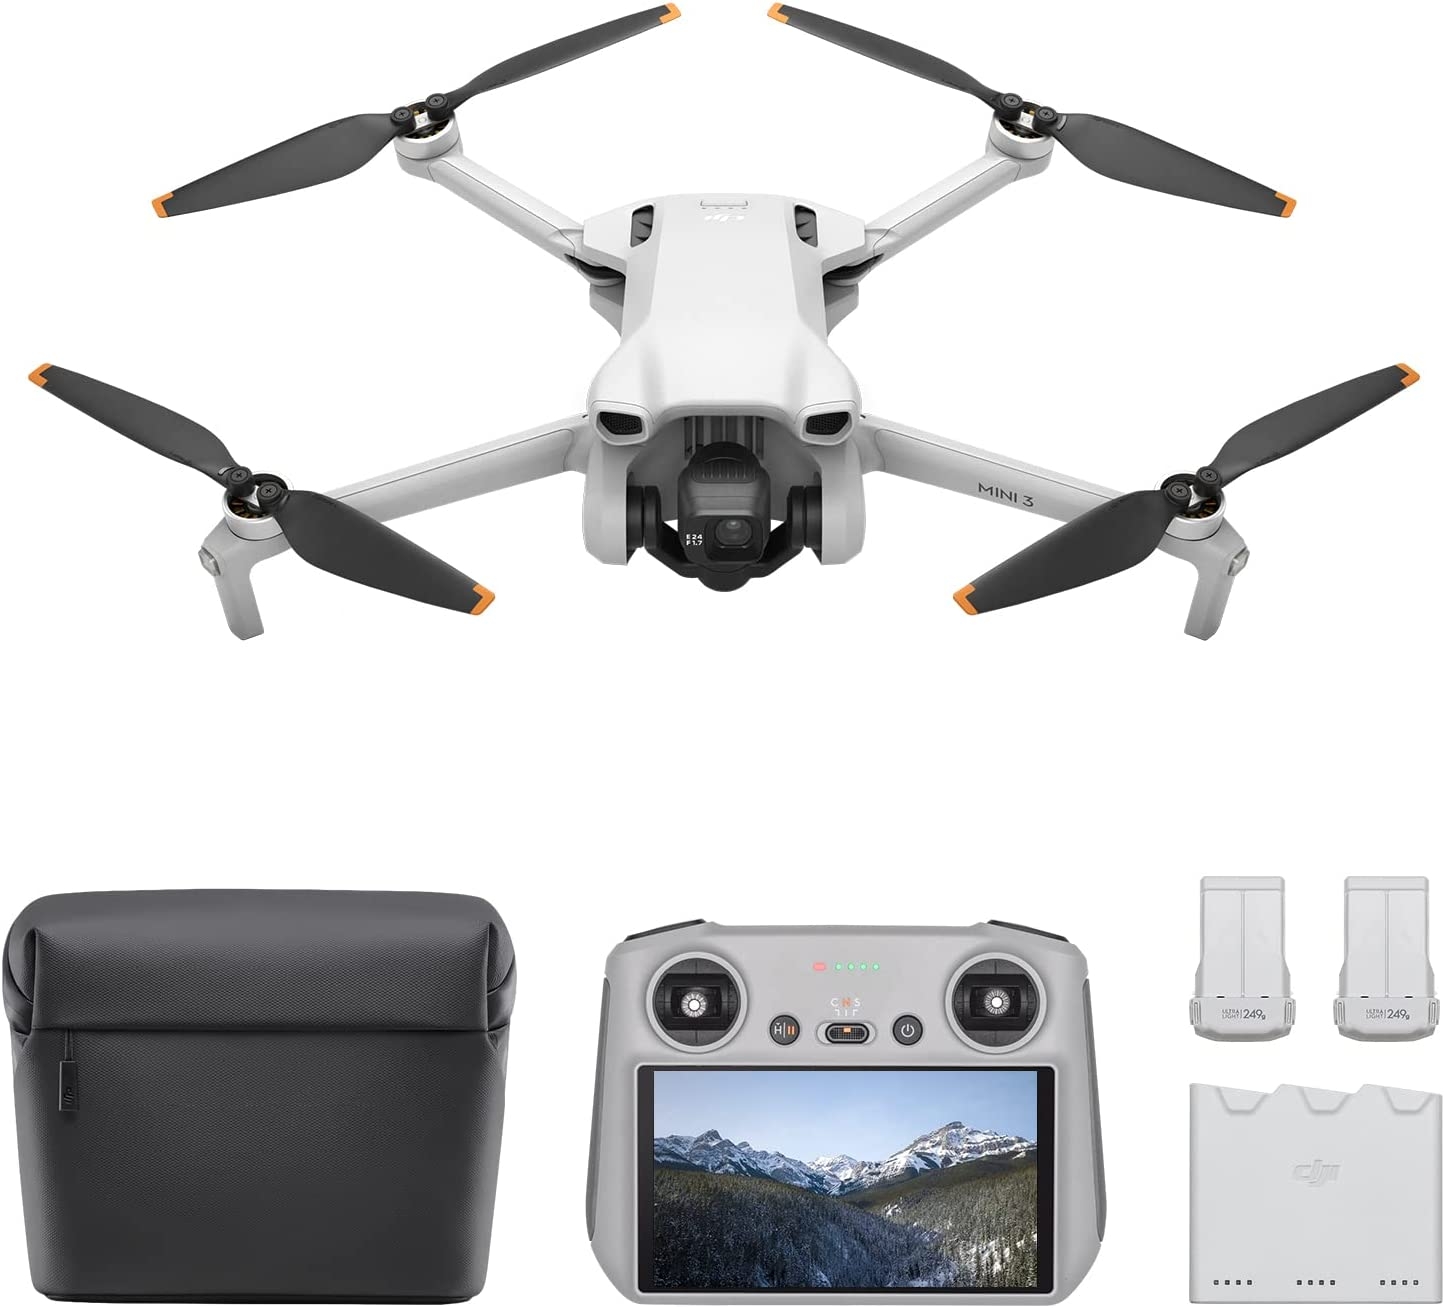 DJI Mini 3 Fly More Combo (DJI RC) – Lightweight and foldable mini camera drone with 4K HDR video, 38 min flight time, real